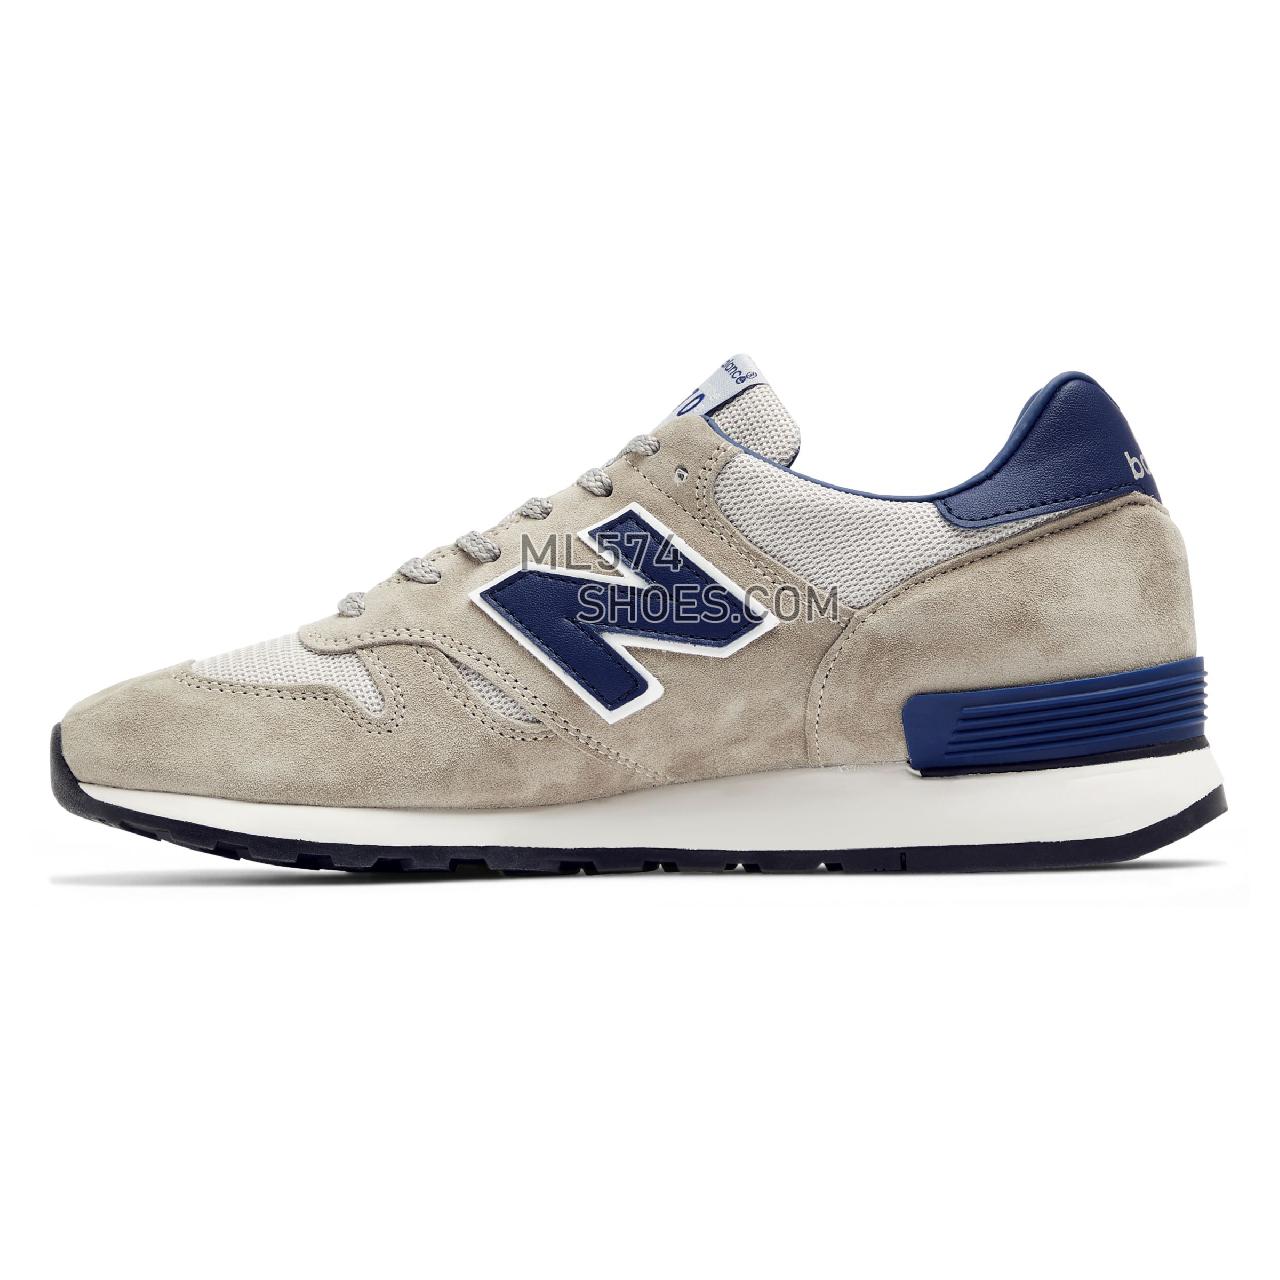 New Balance Made in UK 670 - Men's Made in USA And UK Sneakers - Grey with Navy - M670ORC